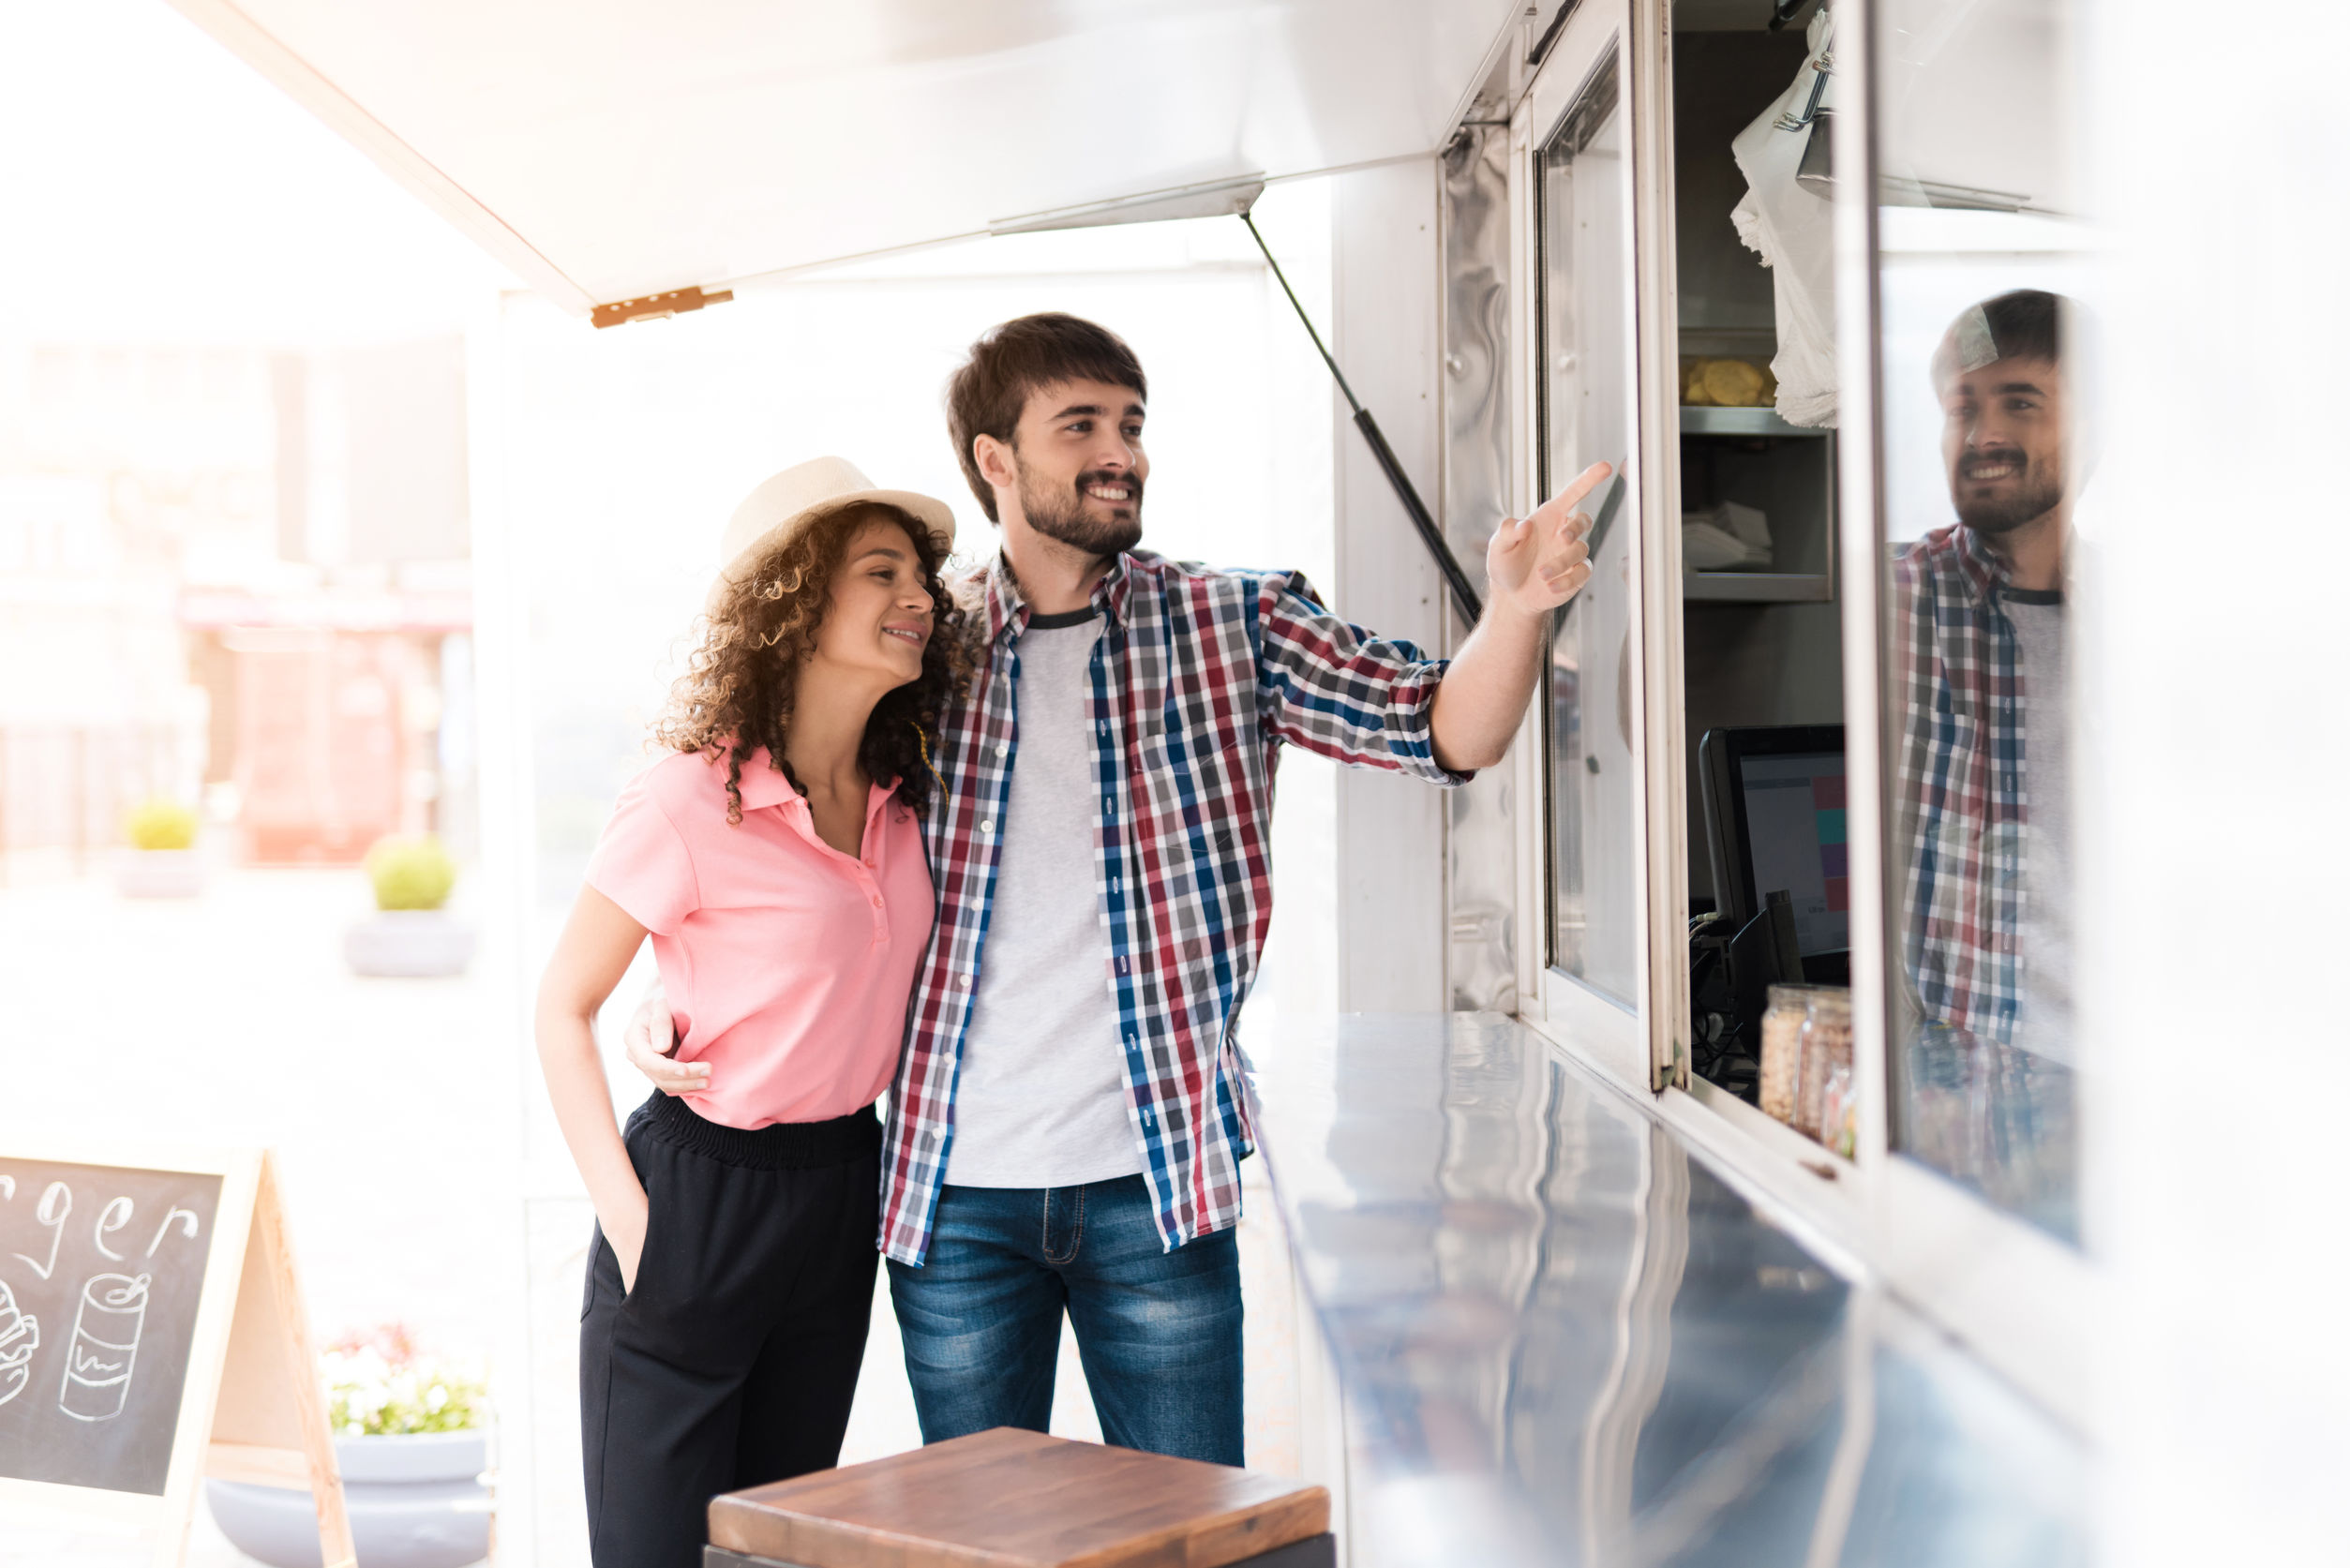 What Entrepreneurs Need to Know to Justify Food Truck Cost